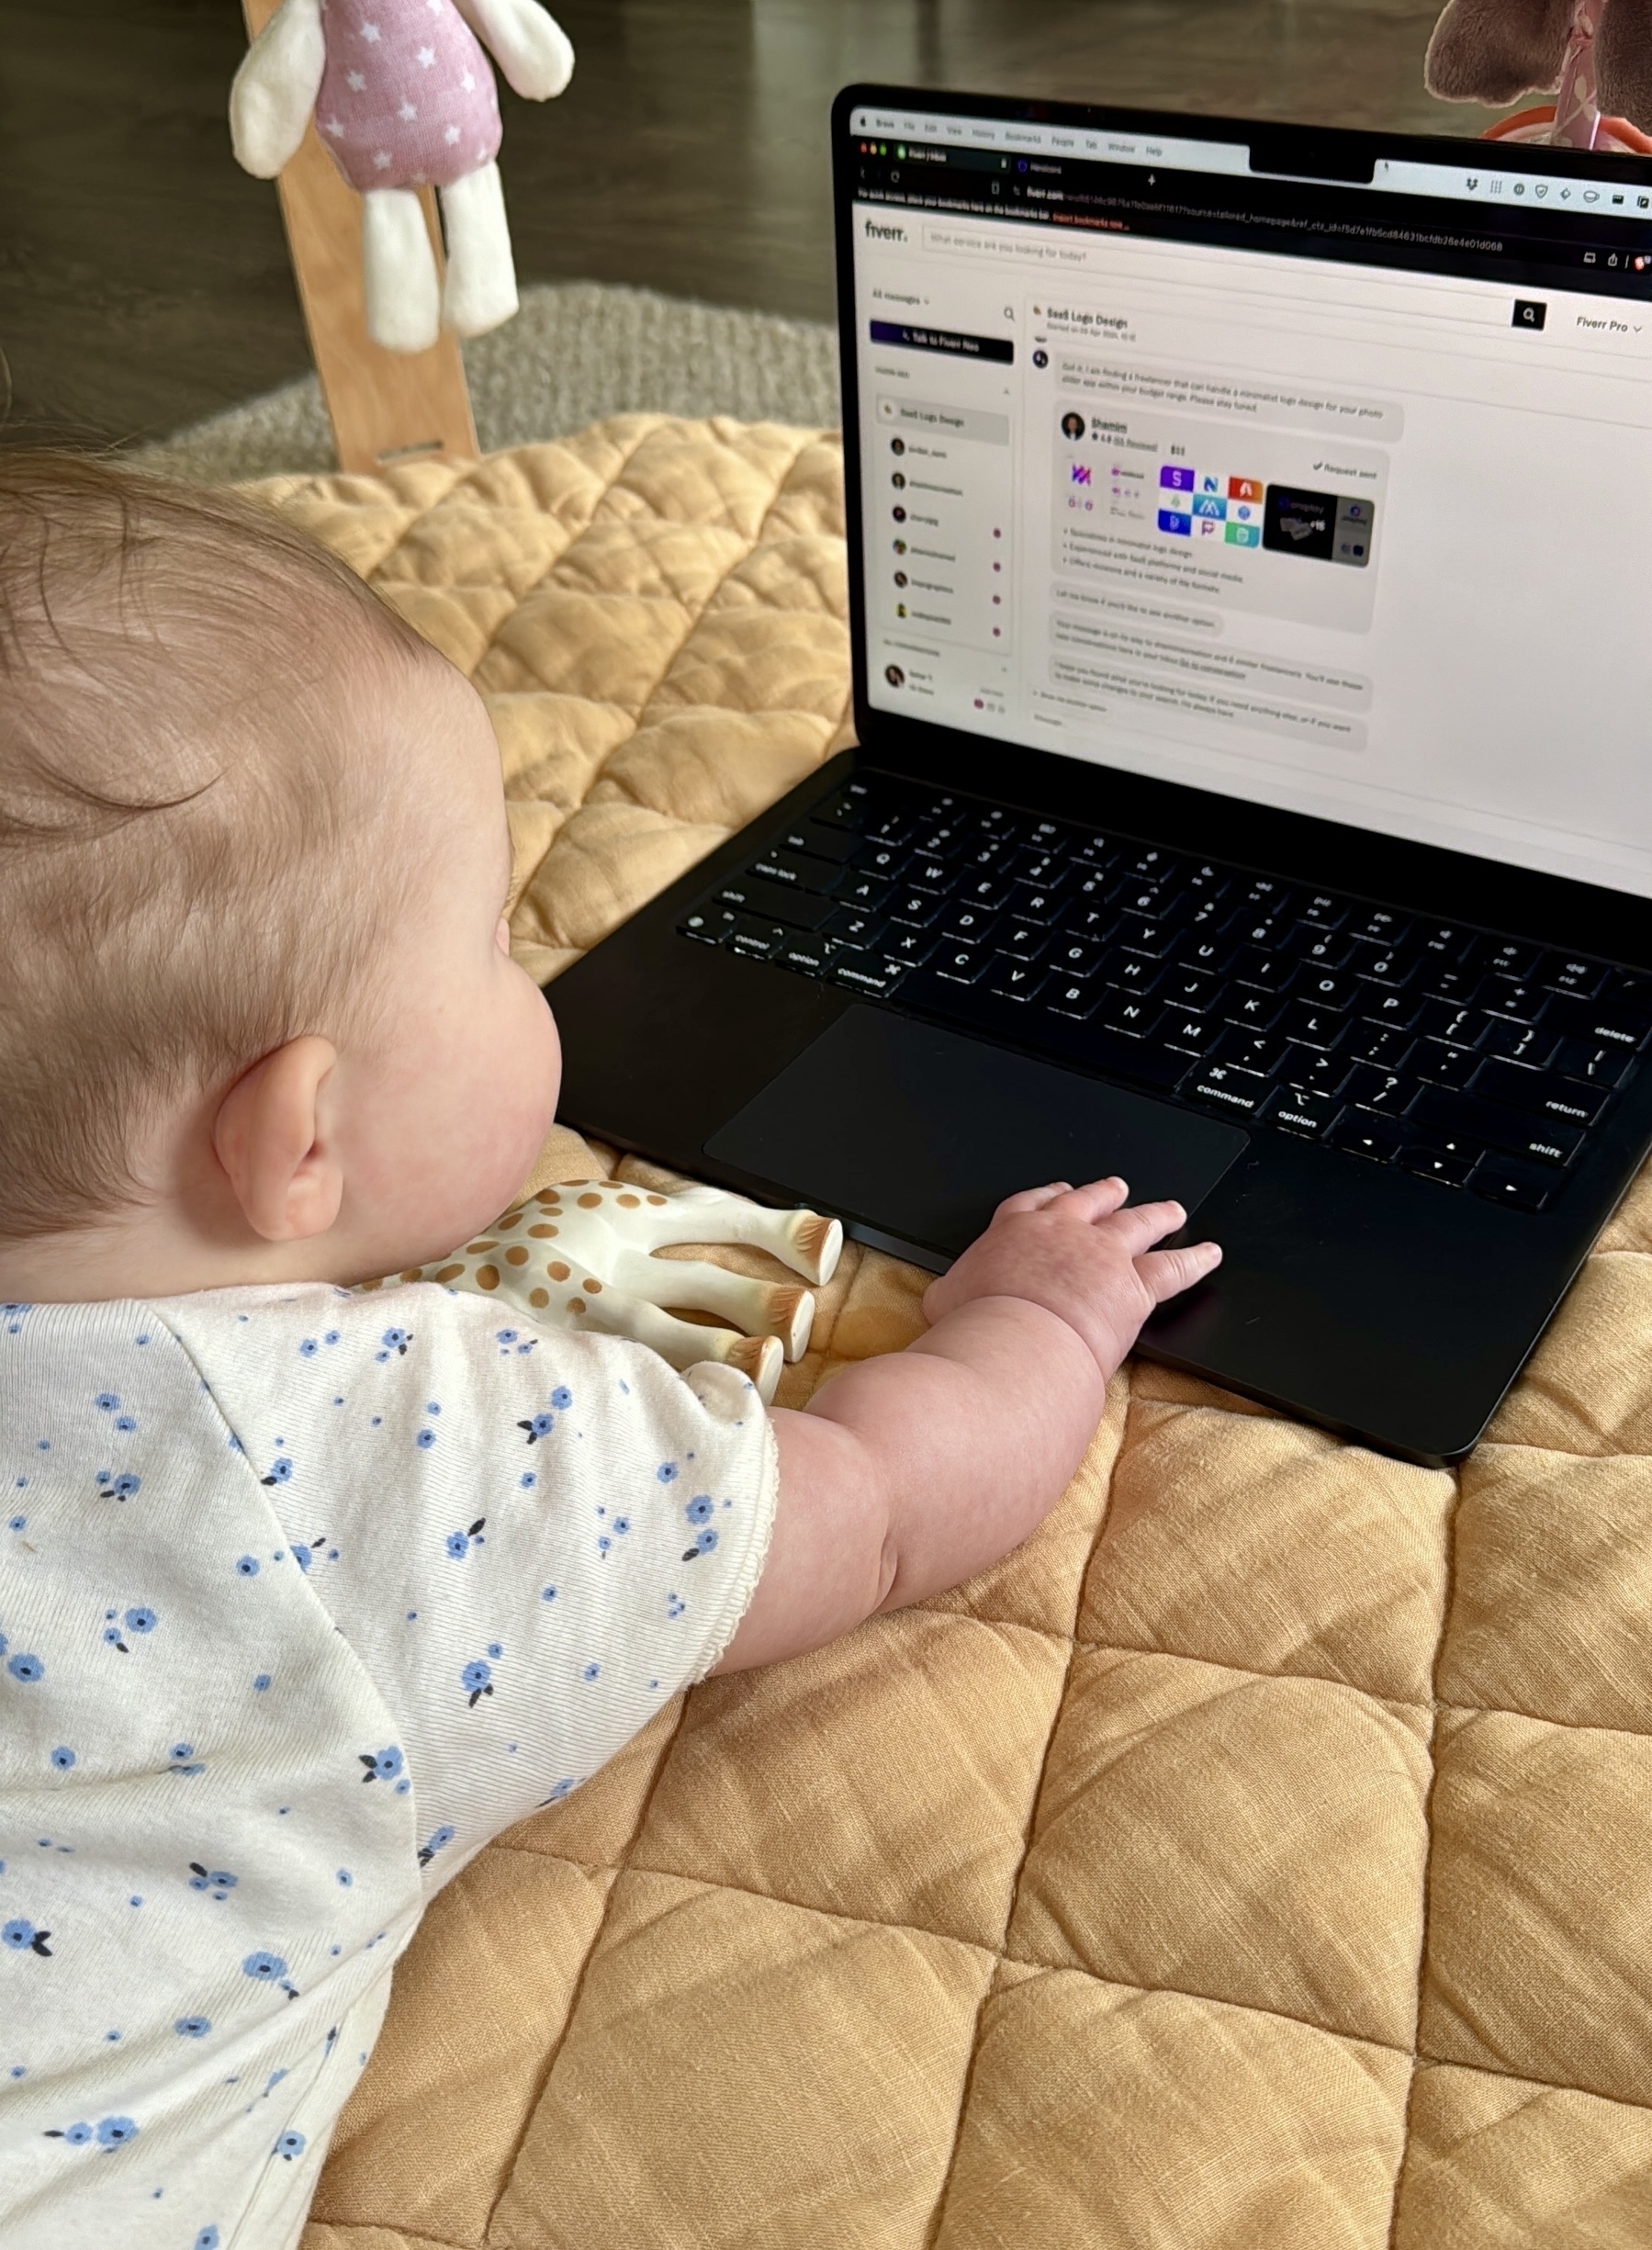 Baby using a laptop